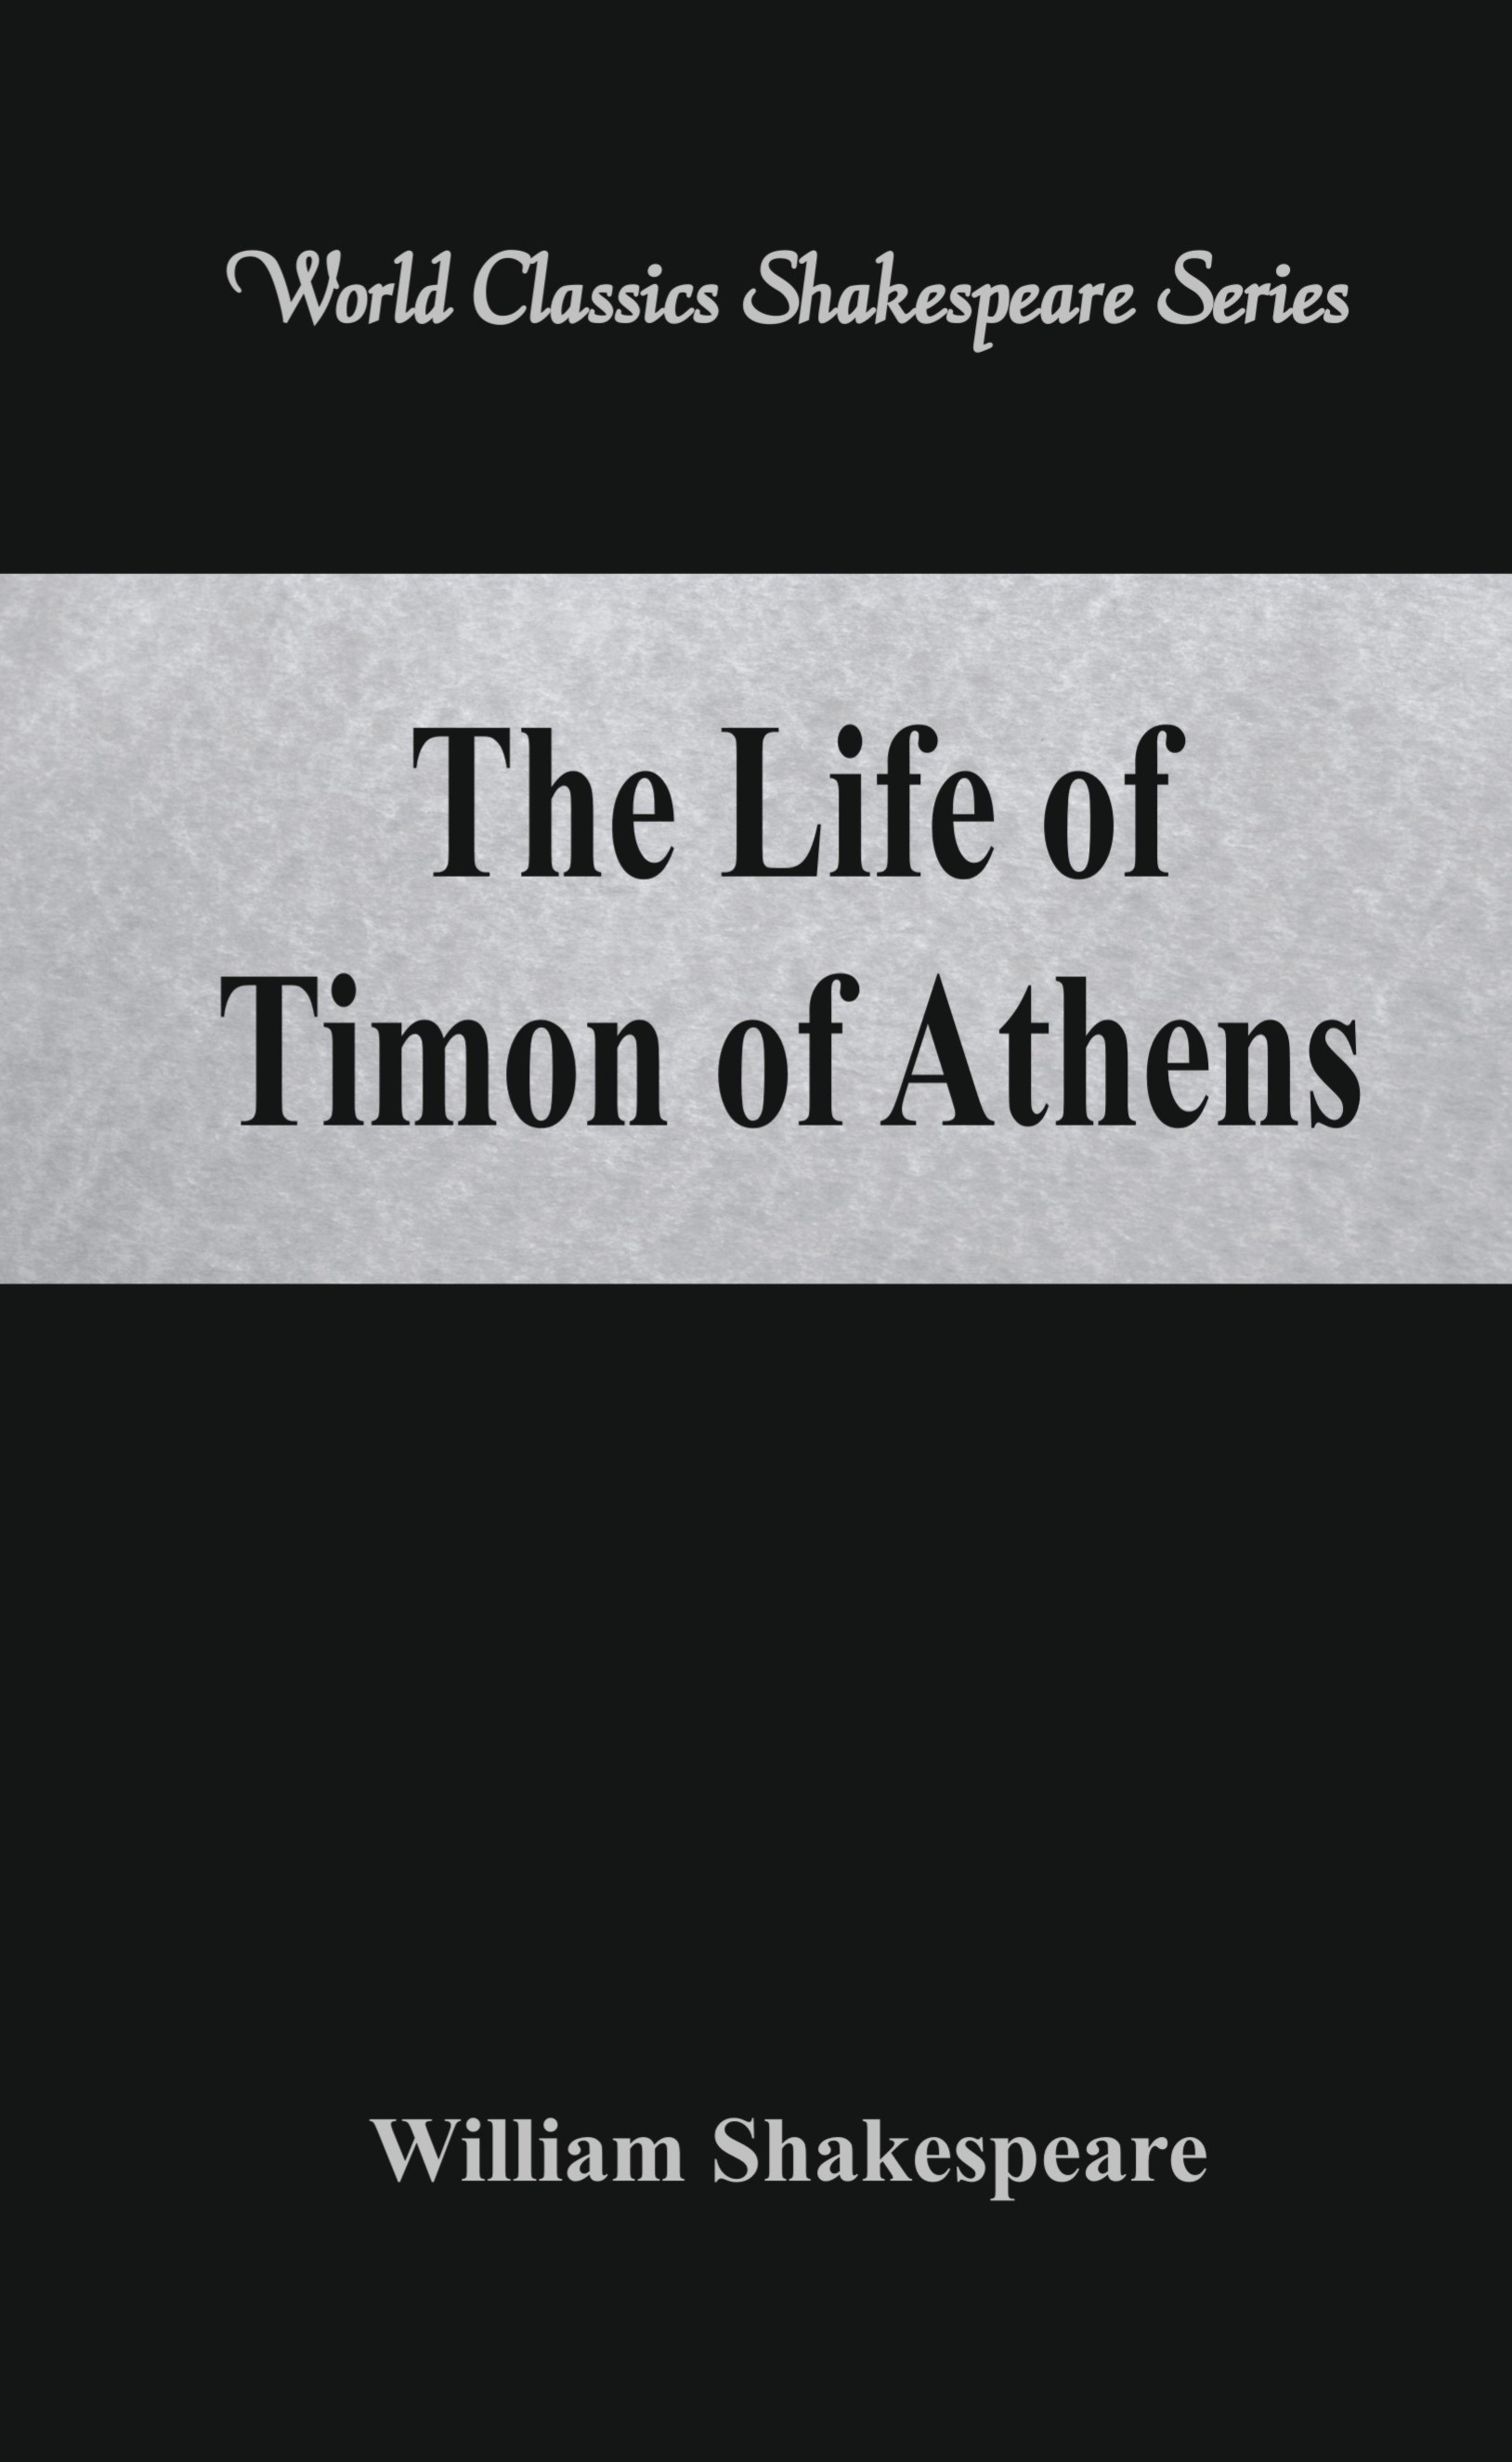 The Life of Timon of Athens (World Classics Shakespeare Series)